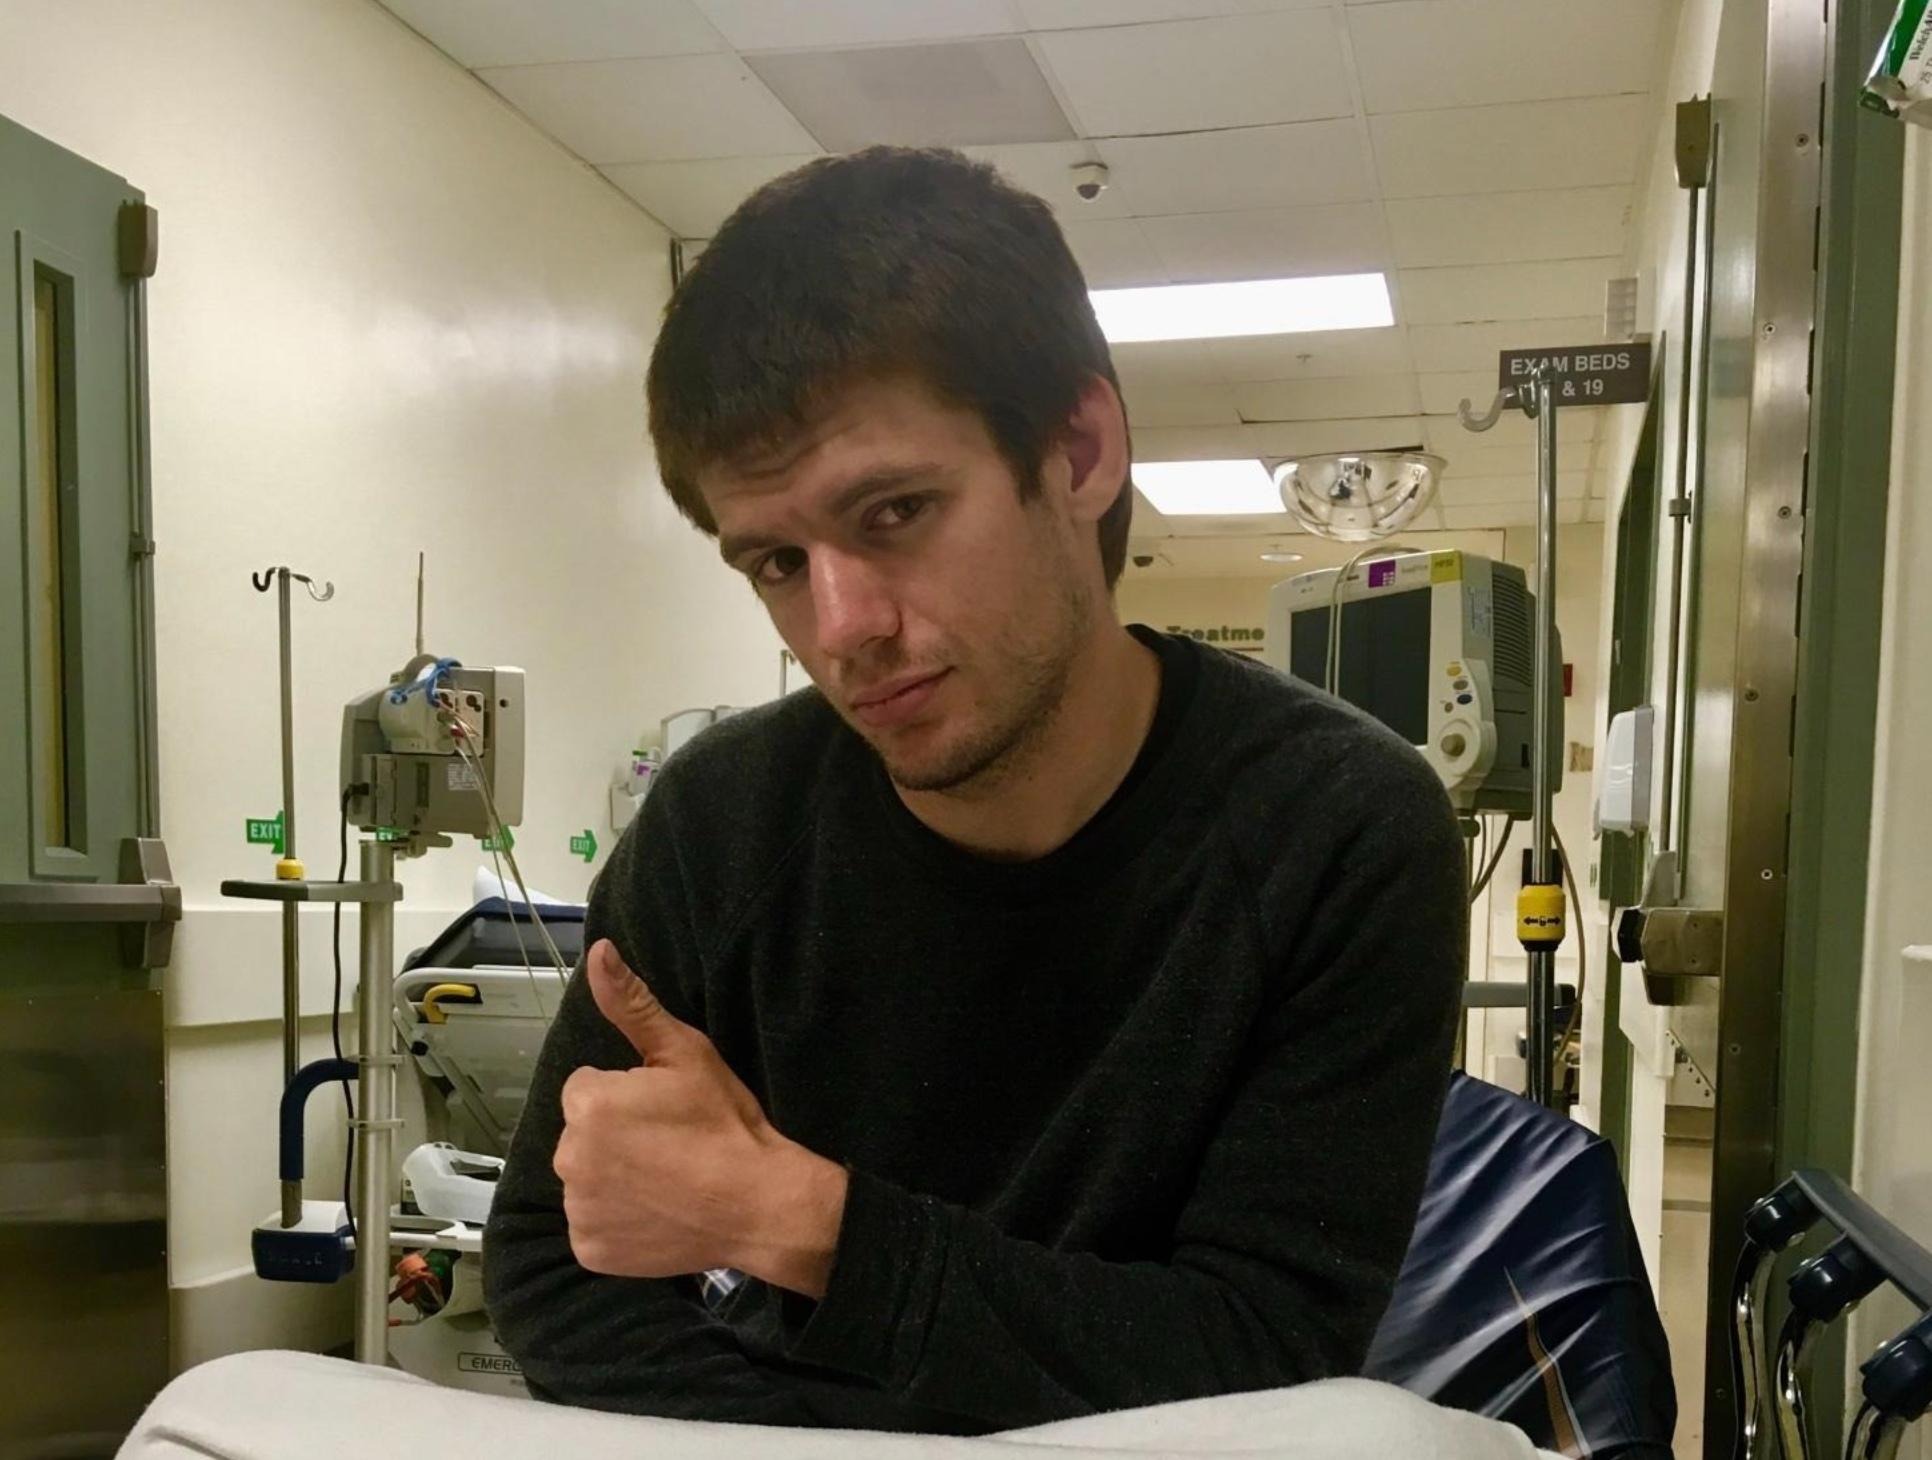 Andy sitting on a hospital bed and giving a thumbs up